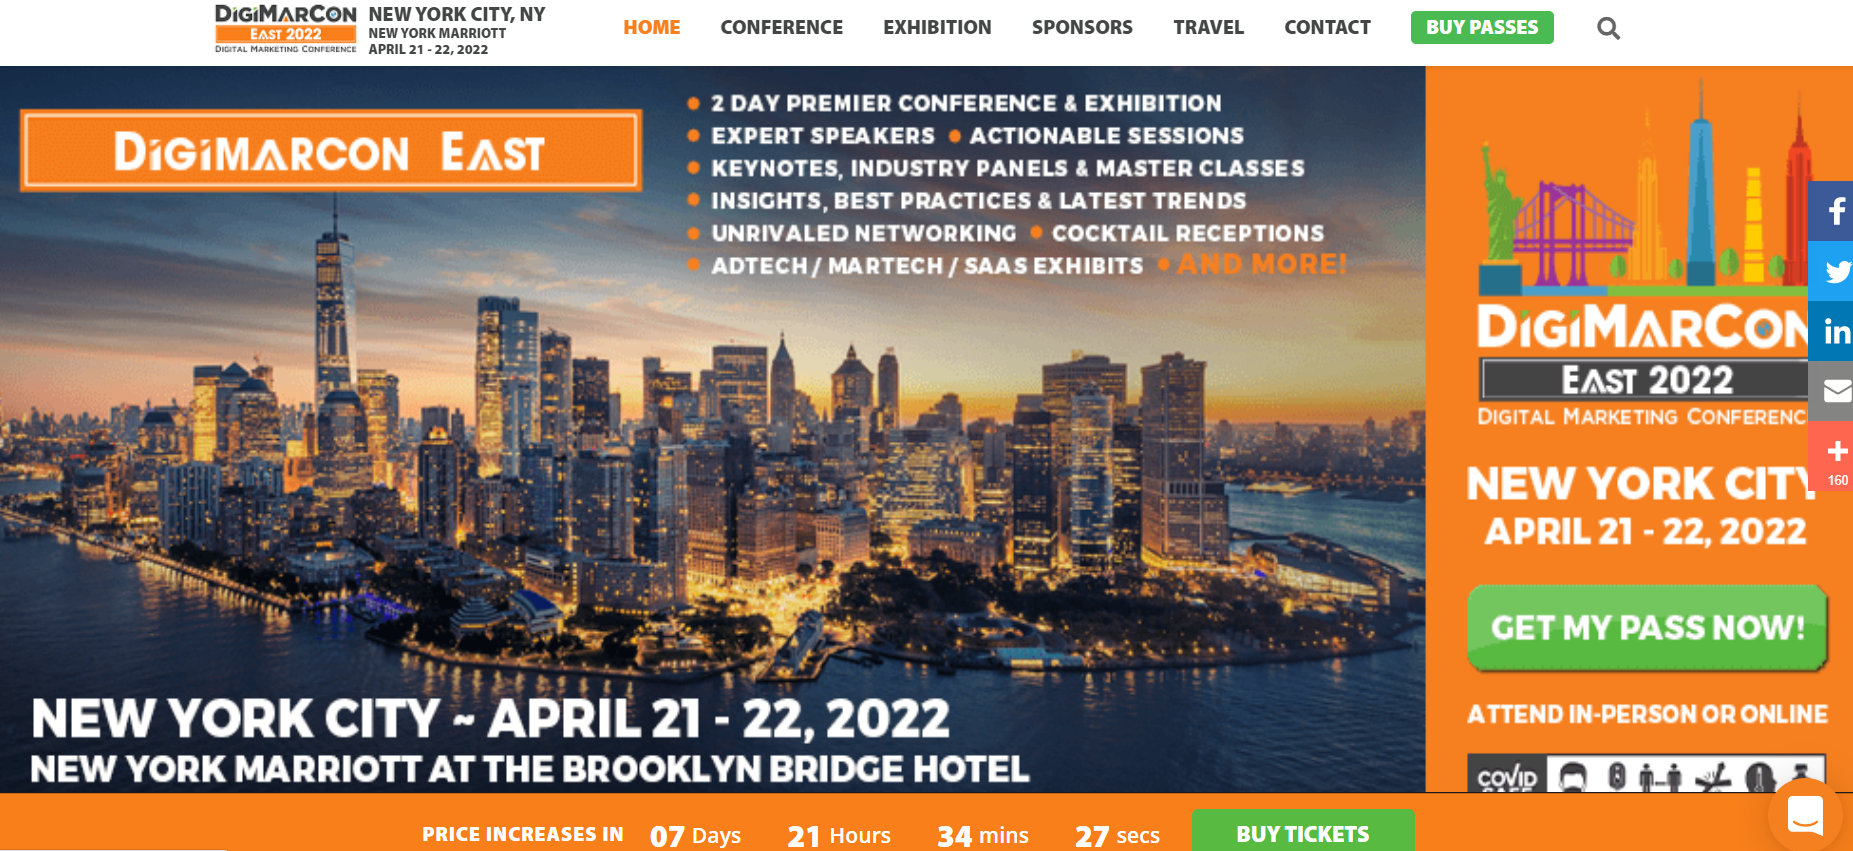 30 Best Digital Marketing Conferences 2022 (Virtual & In-Person)